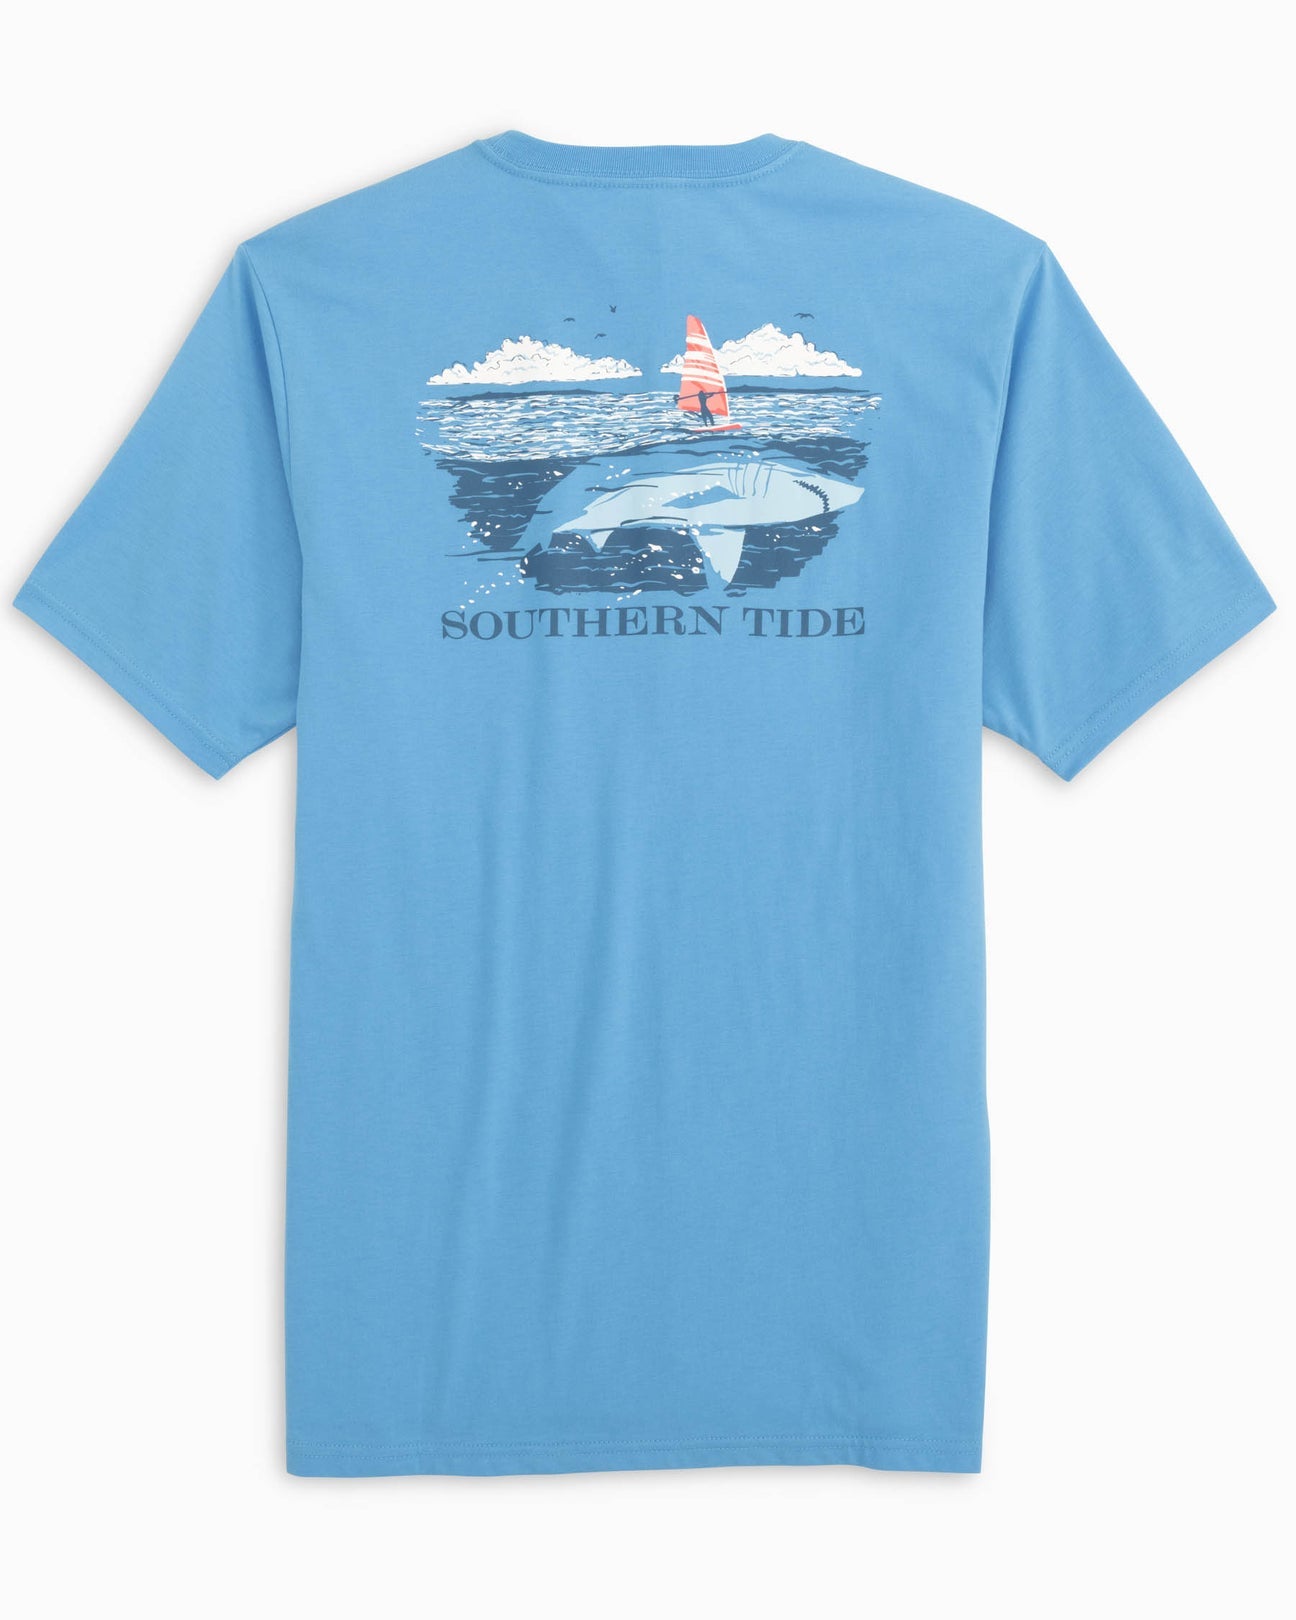 Southern Tide - Men's Fin Surfing Short Sleeve T-Shirt - Full Back View